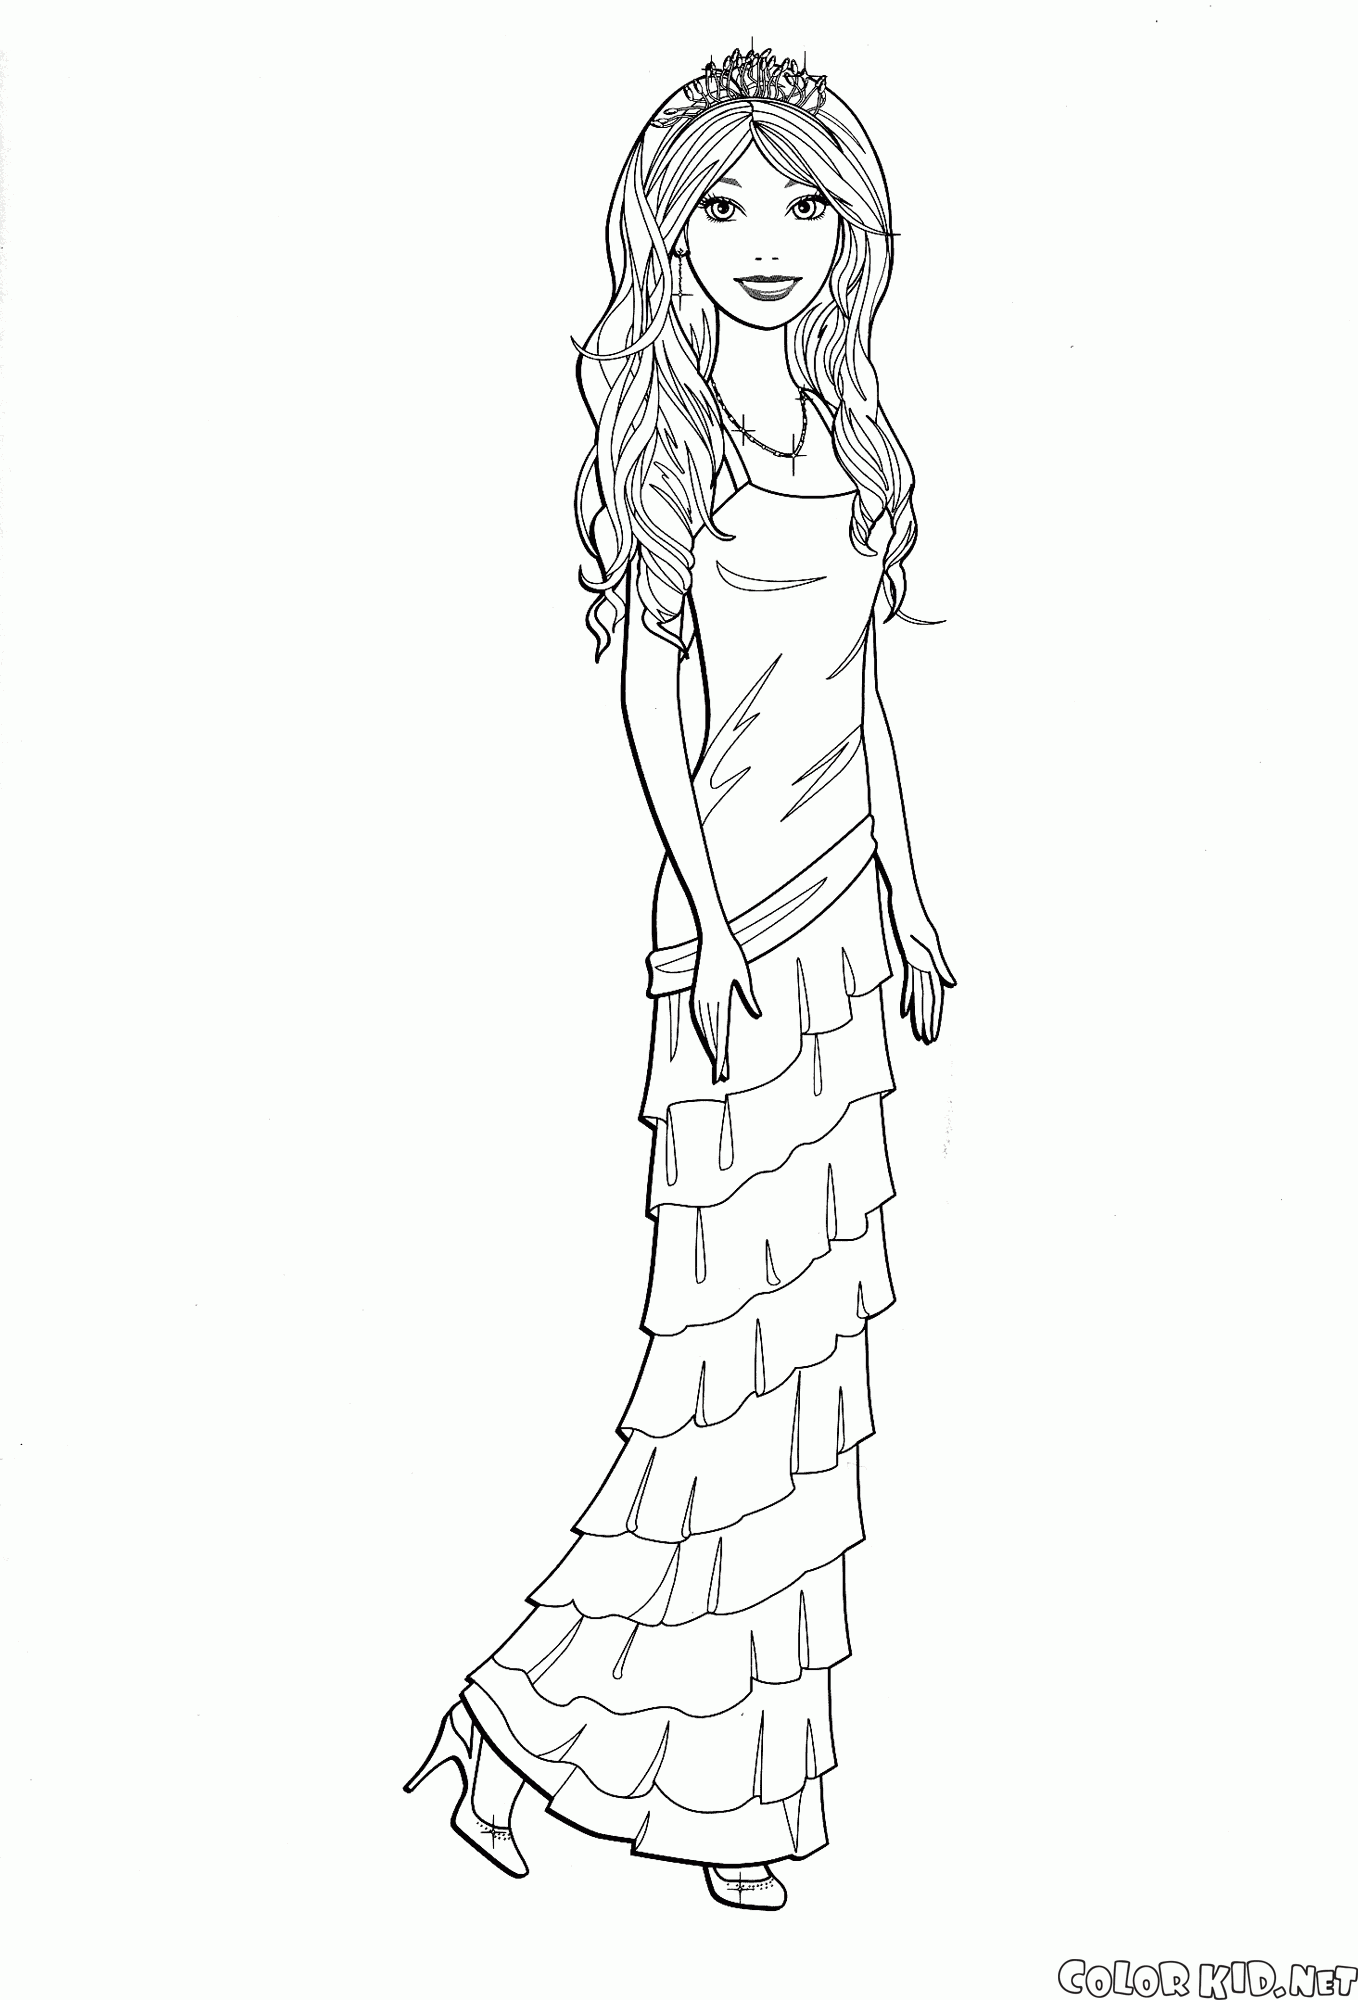 Coloring page - Barbie and elegant dress